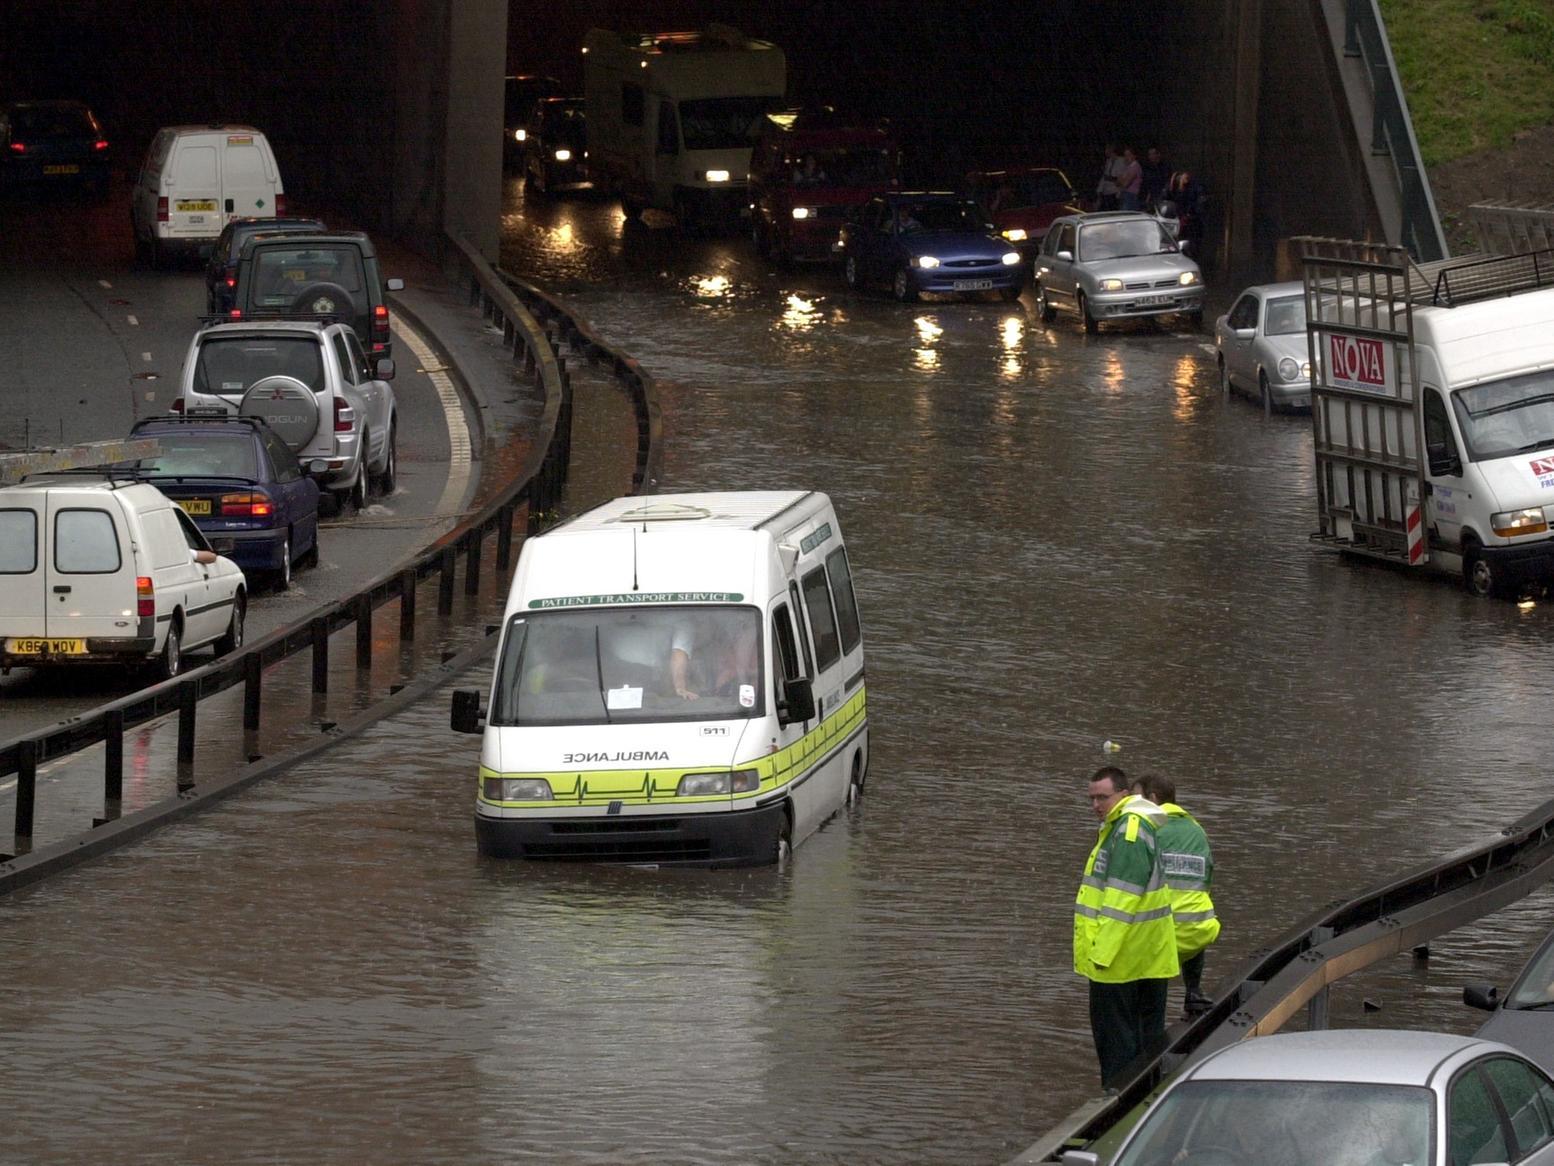 Storms brought chaos to the city just before rush hour. An ambulance driver ponders how to help a stramnded colleague and patients on the Leeds Inner Ring Road.